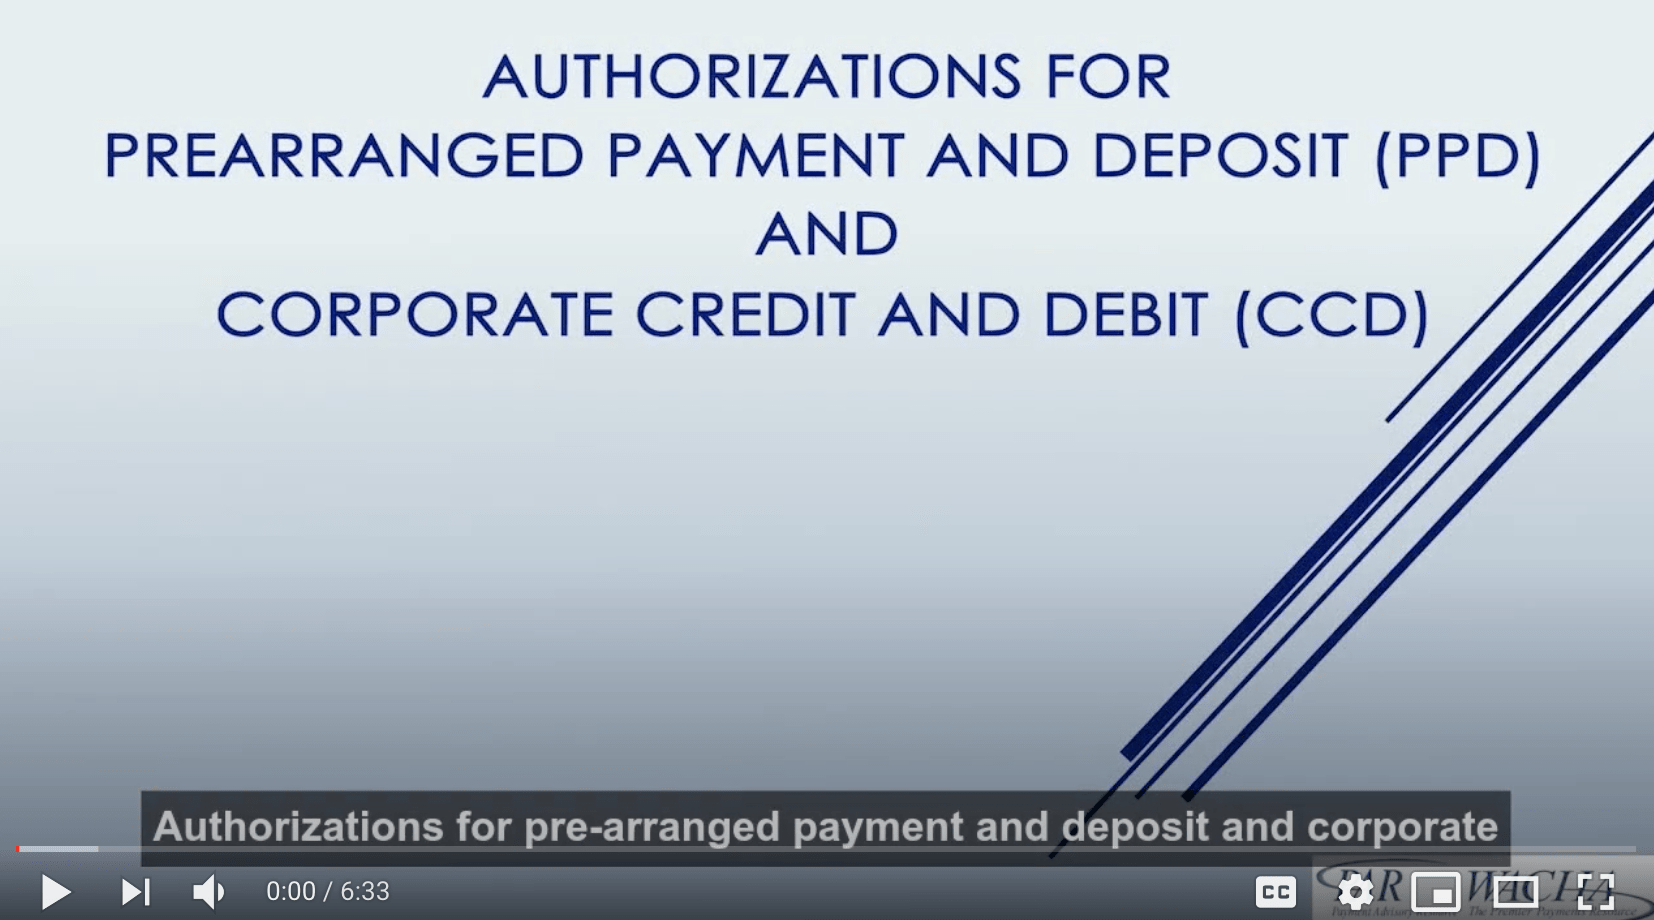 Authorizations for Consumer and Corporate Transactions